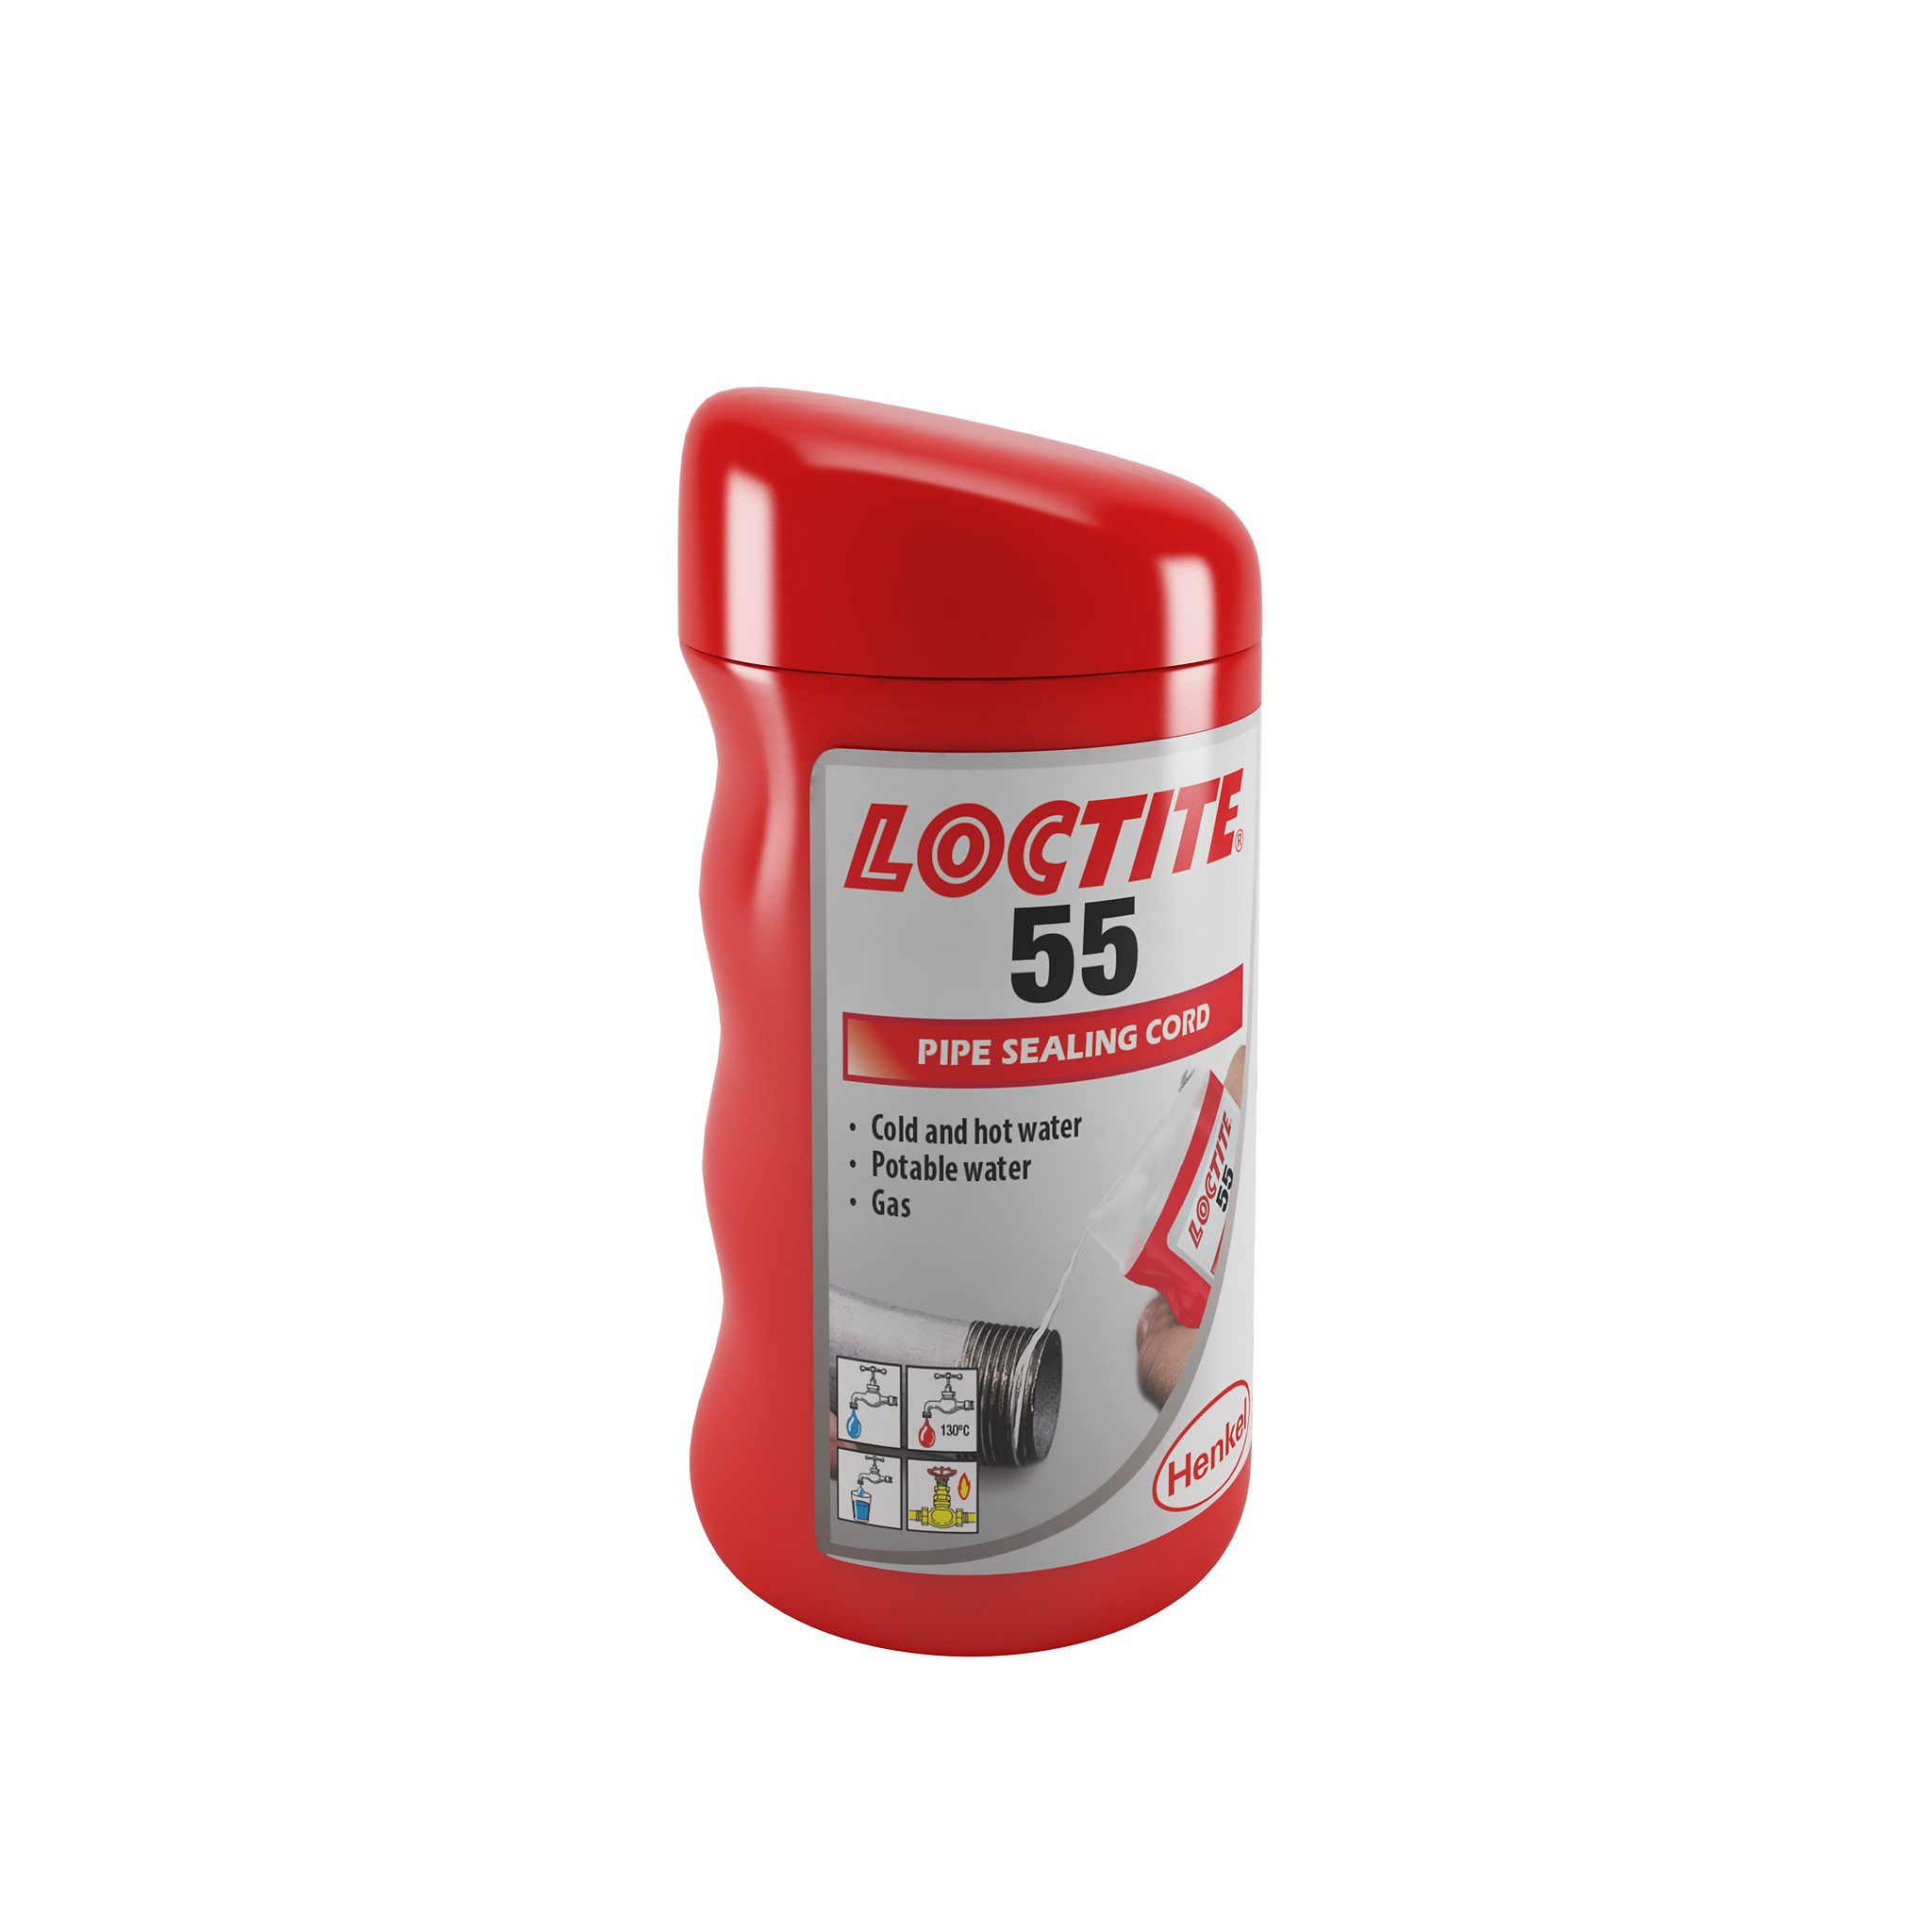 Loctite 55 Pipe Sealing Cord 150mm 